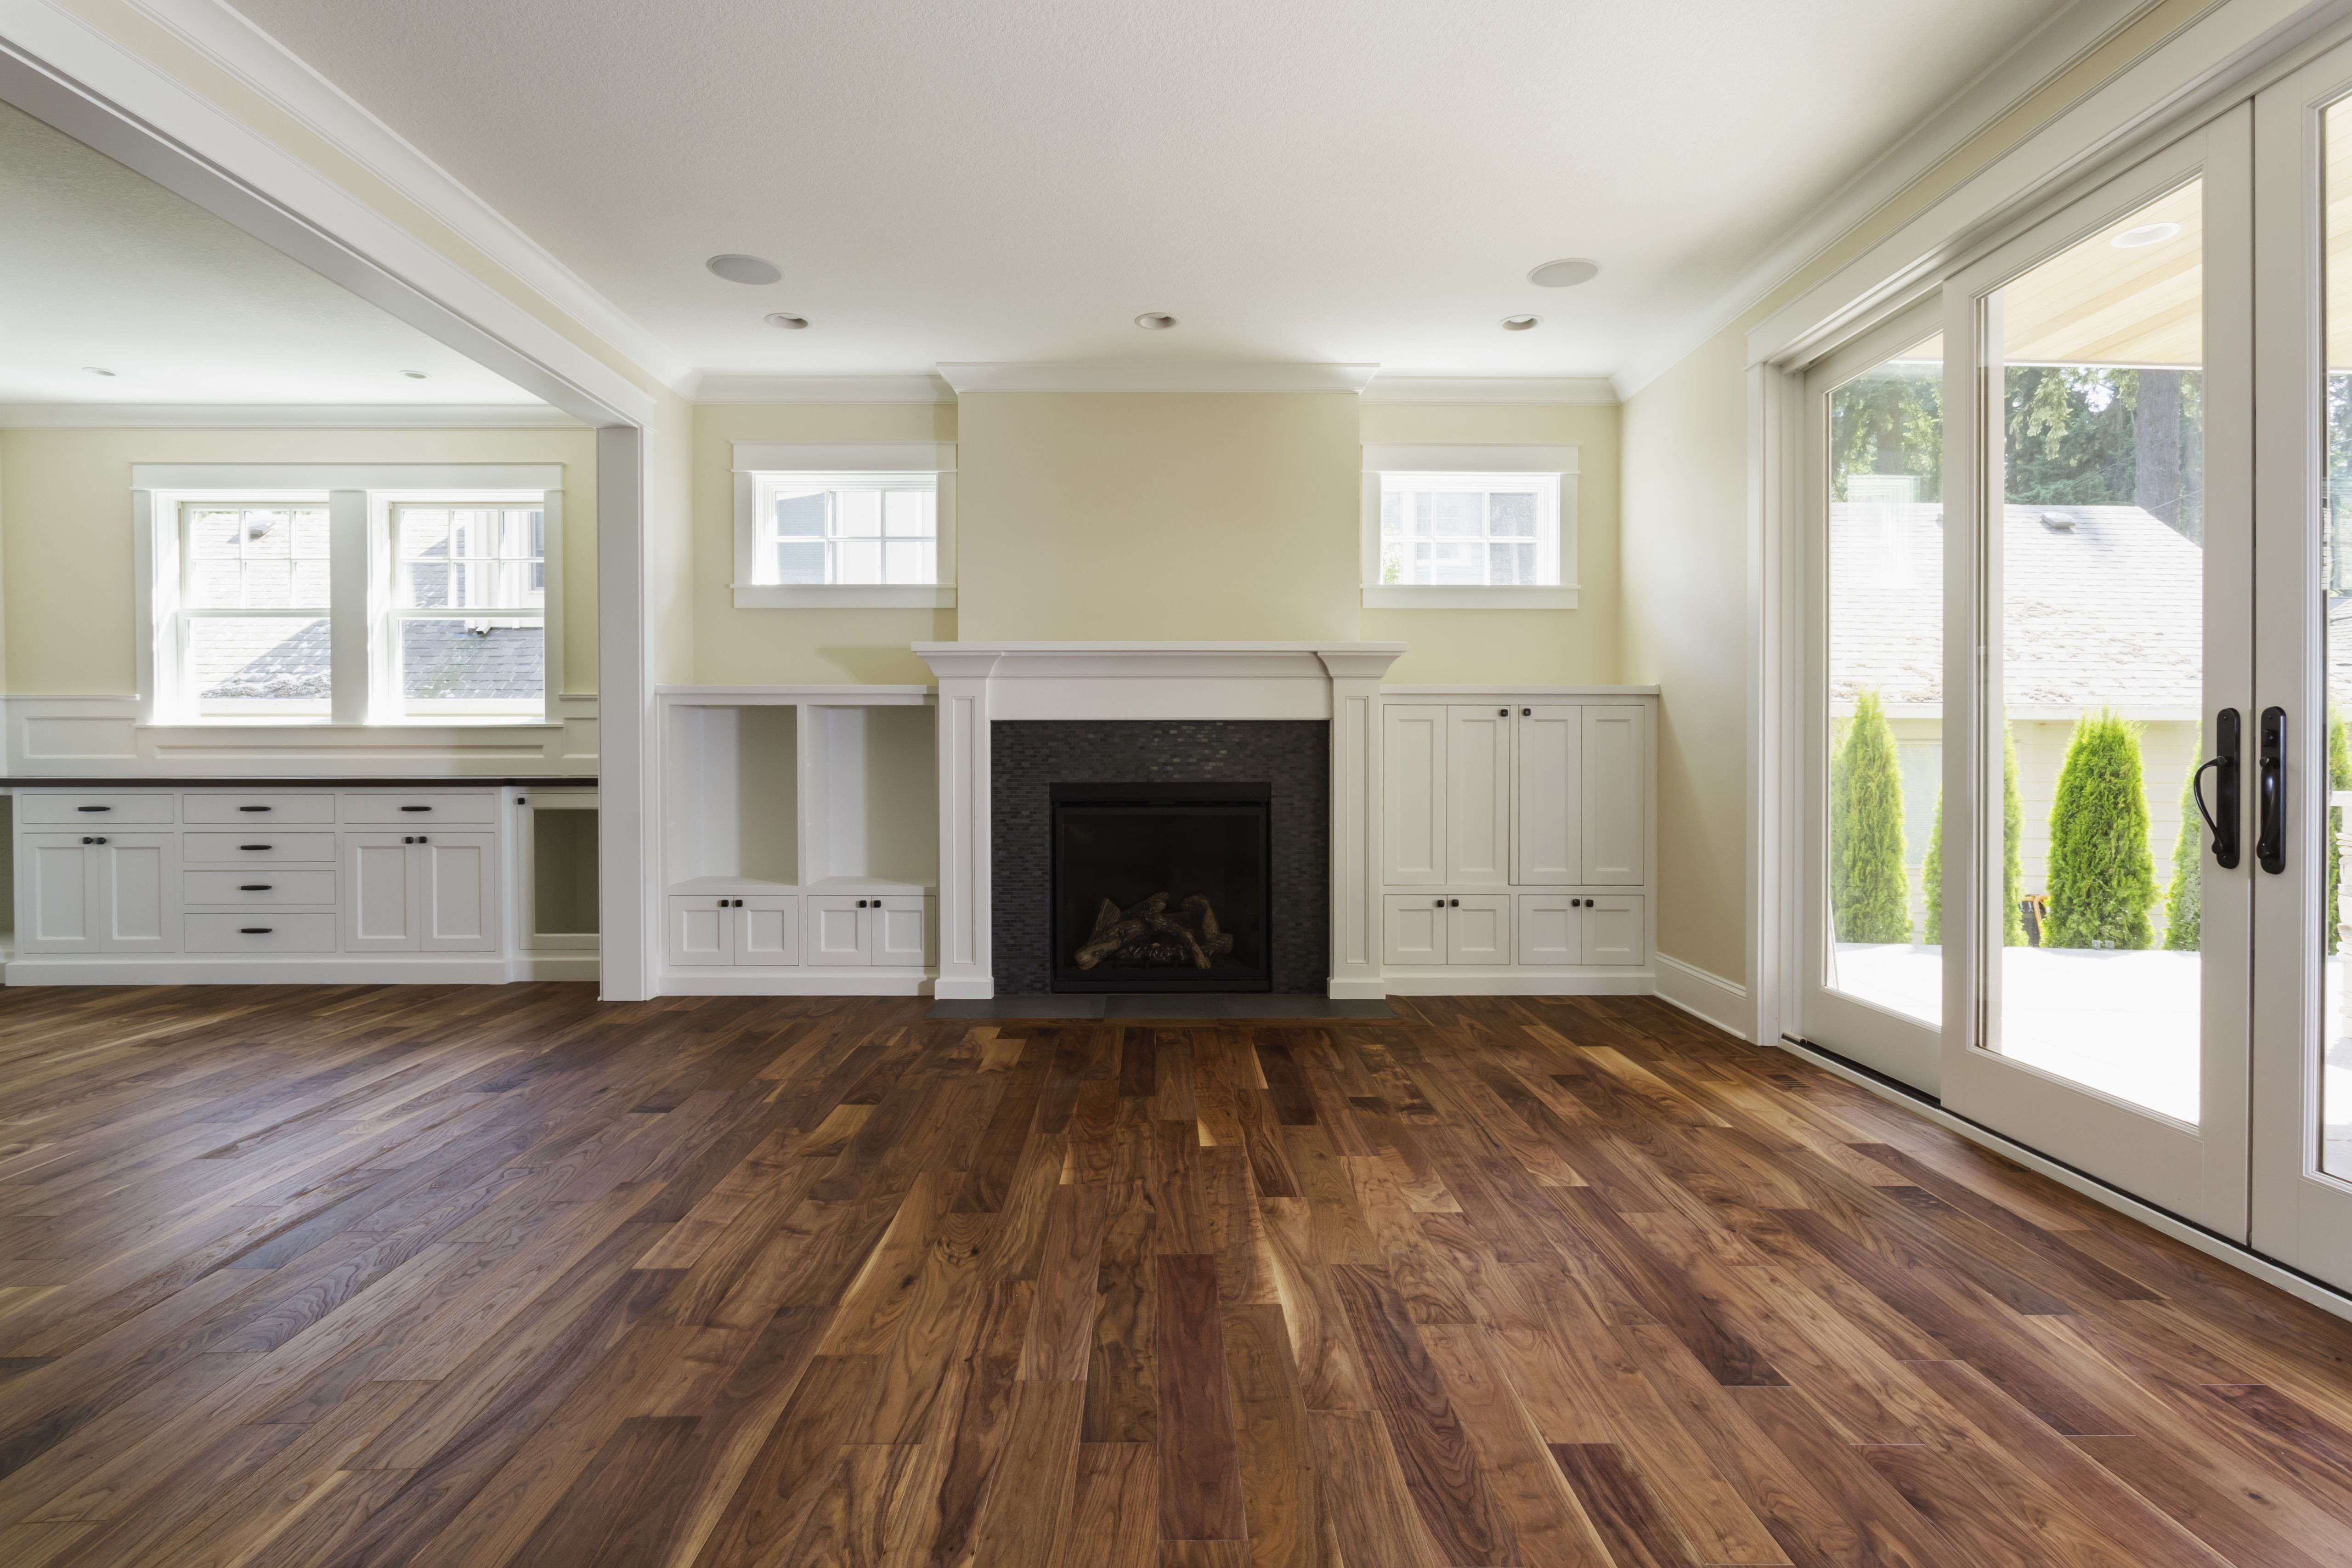 24 Amazing Hardwood Floor Stairs Ideas 2024 free download hardwood floor stairs ideas of the pros and cons of prefinished hardwood flooring in fireplace and built in shelves in living room 482143011 57bef8e33df78cc16e035397